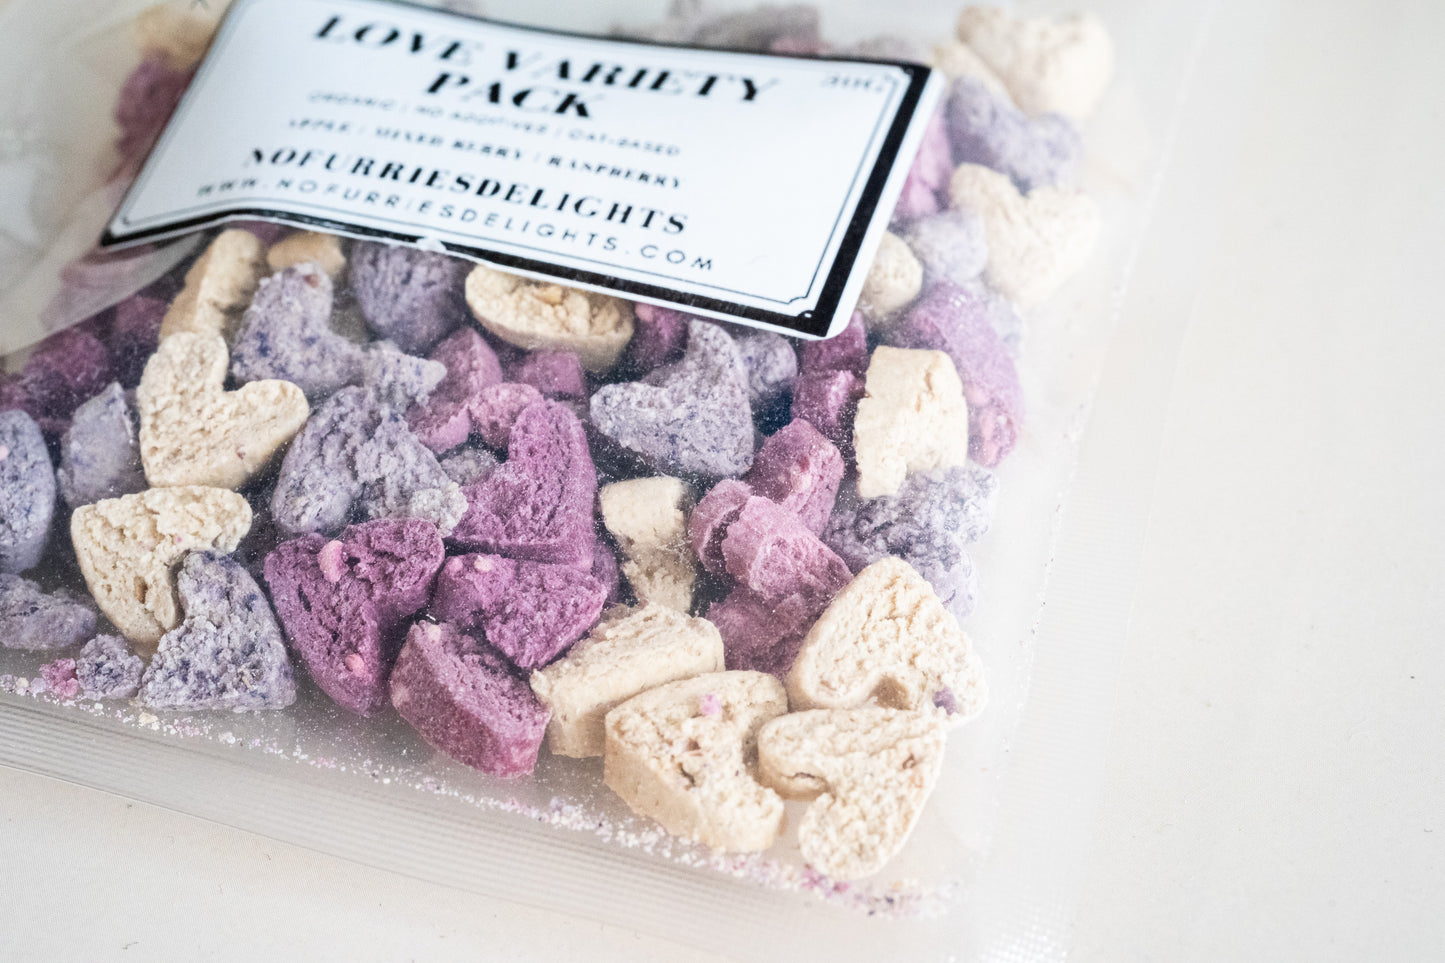 Close-up view of the heart shaped treats for small pets.